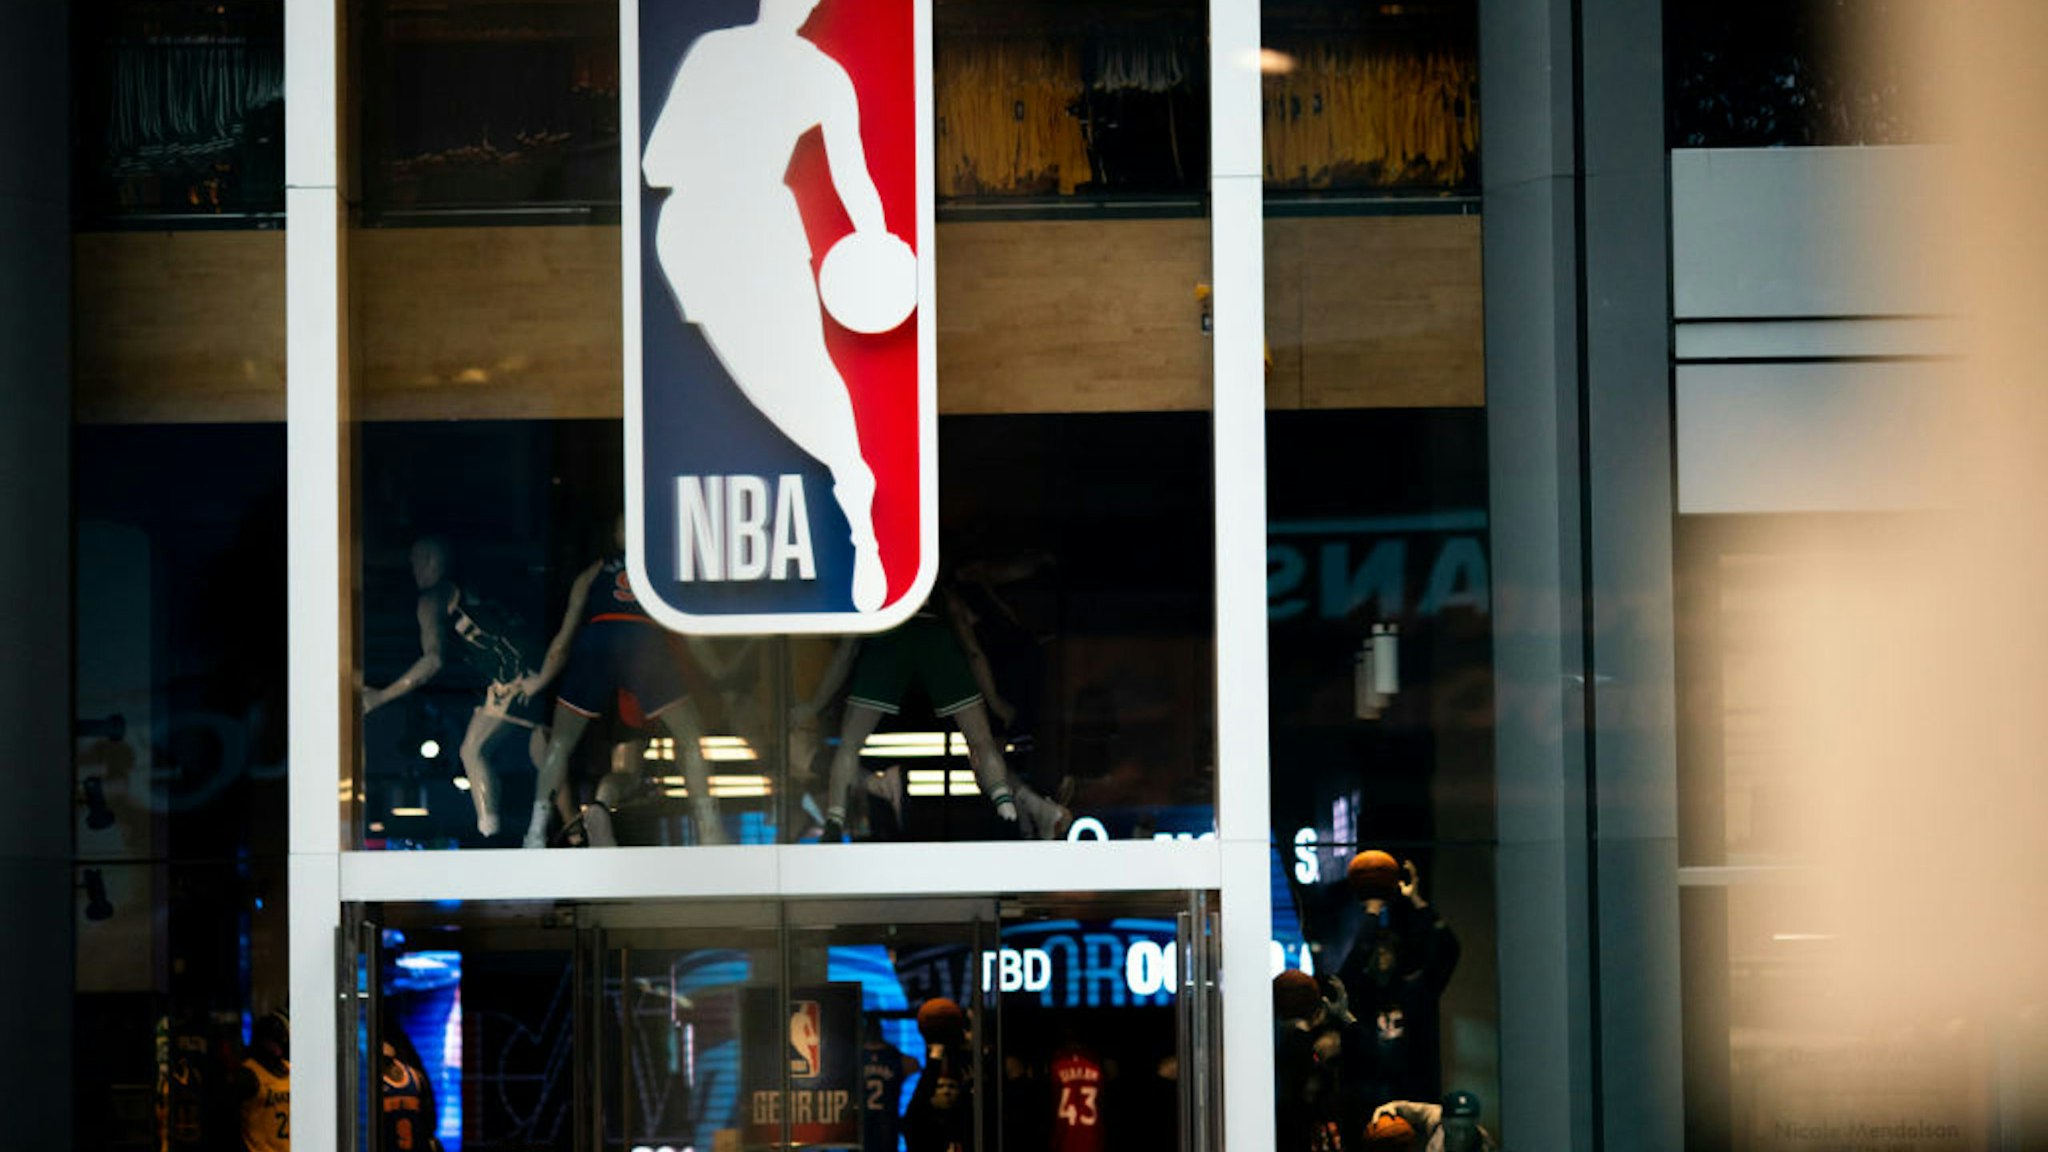 NEW YORK, NY - MARCH 12: An NBA logo is shown at the 5th Avenue NBA store on March 12, 2020 in New York City. The National Basketball Association said they would suspend all games after player Rudy Gobert of the Utah Jazz reportedly tested positive for the Coronavirus (COVID-19